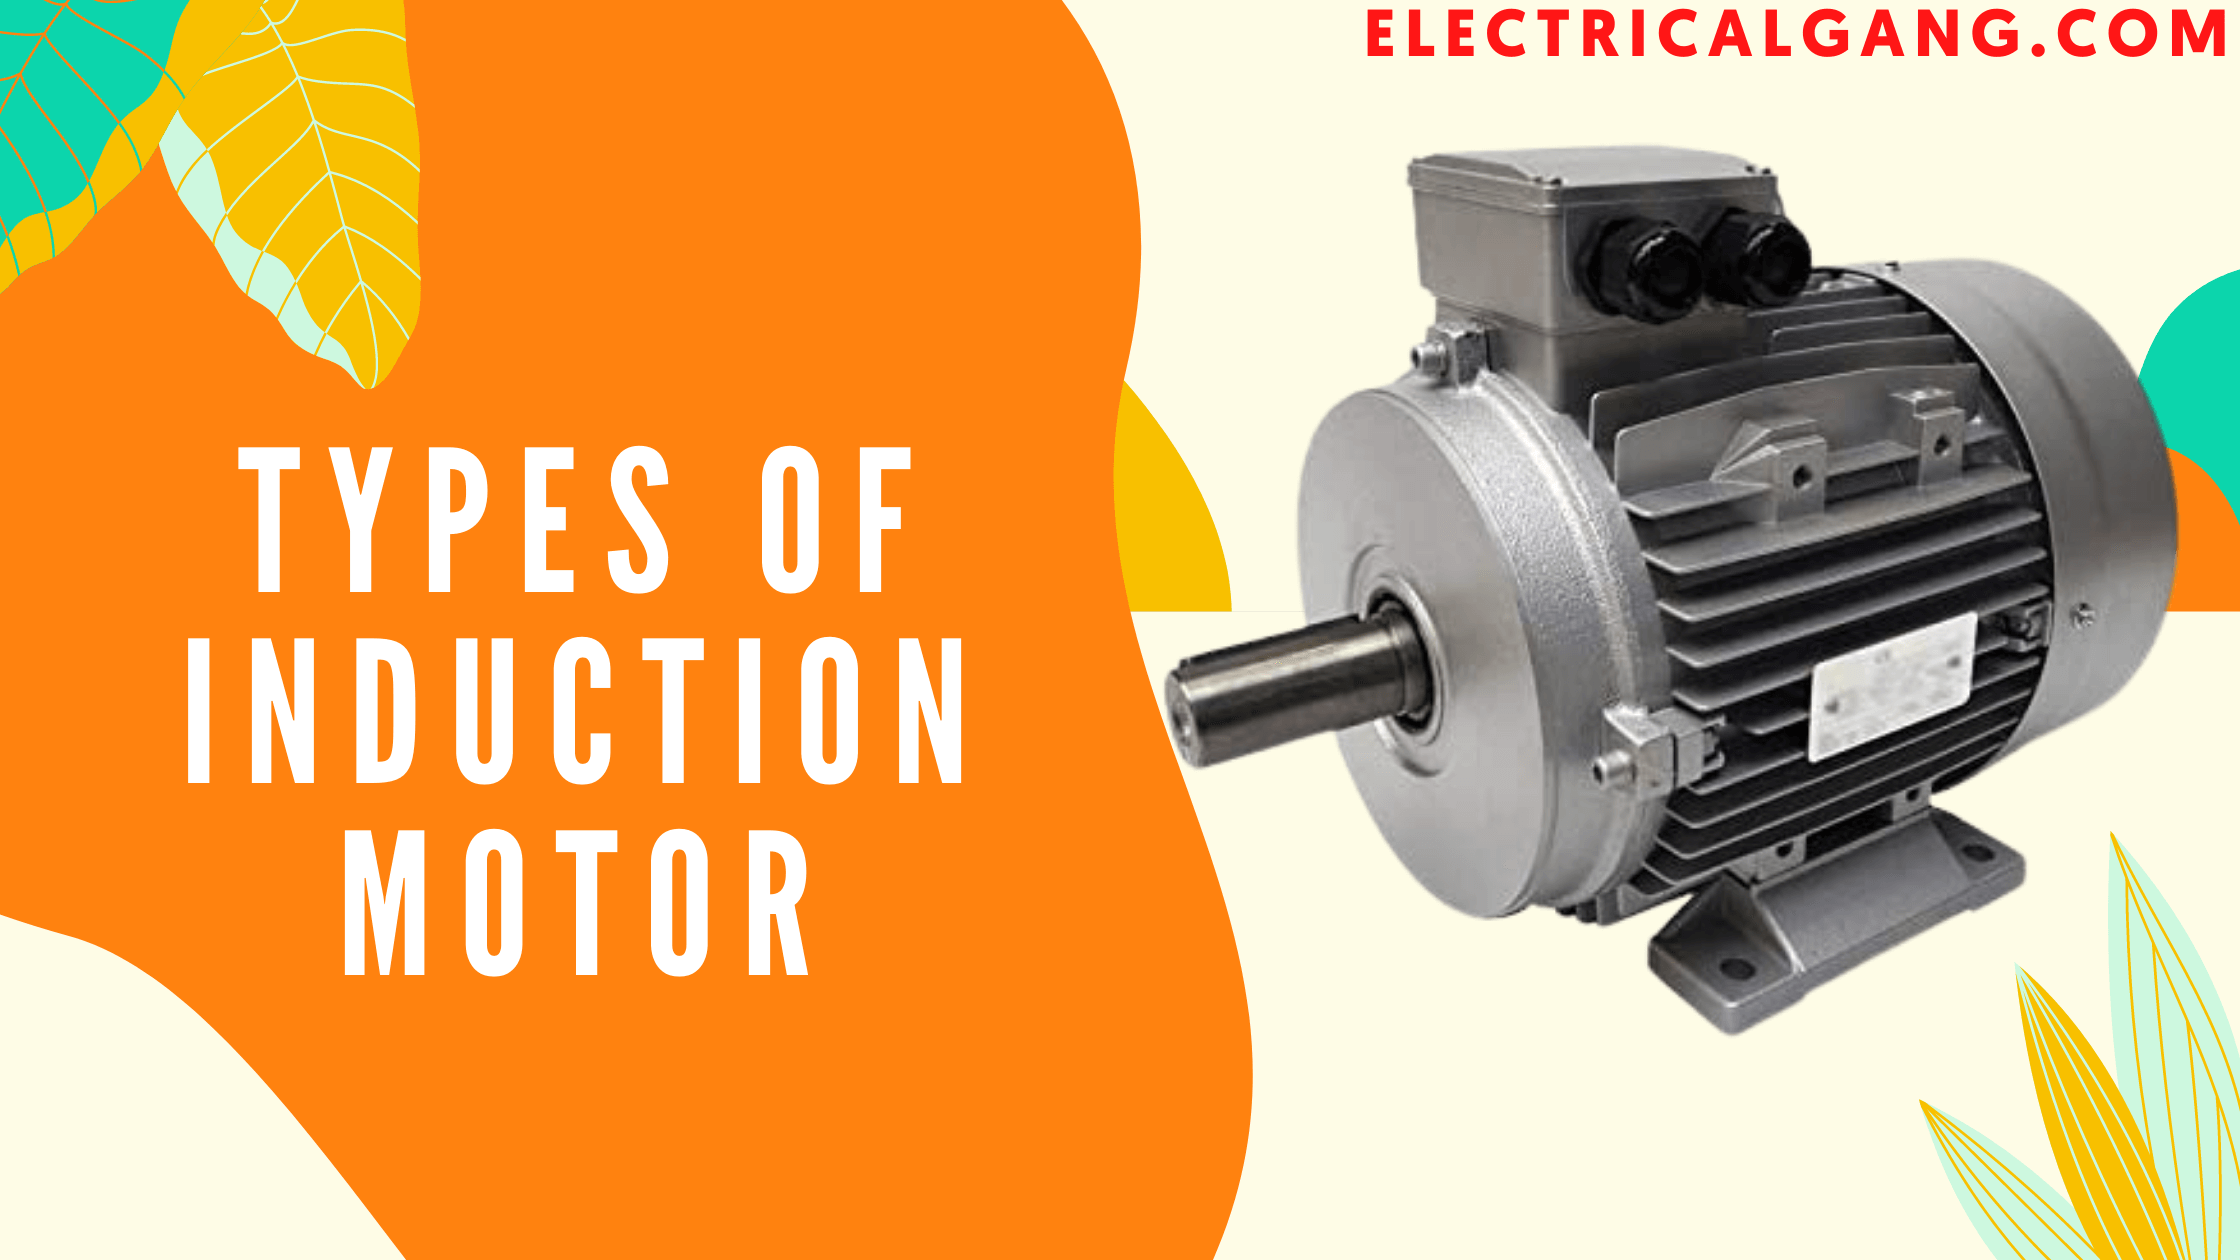 Motor types of induction 7 Most